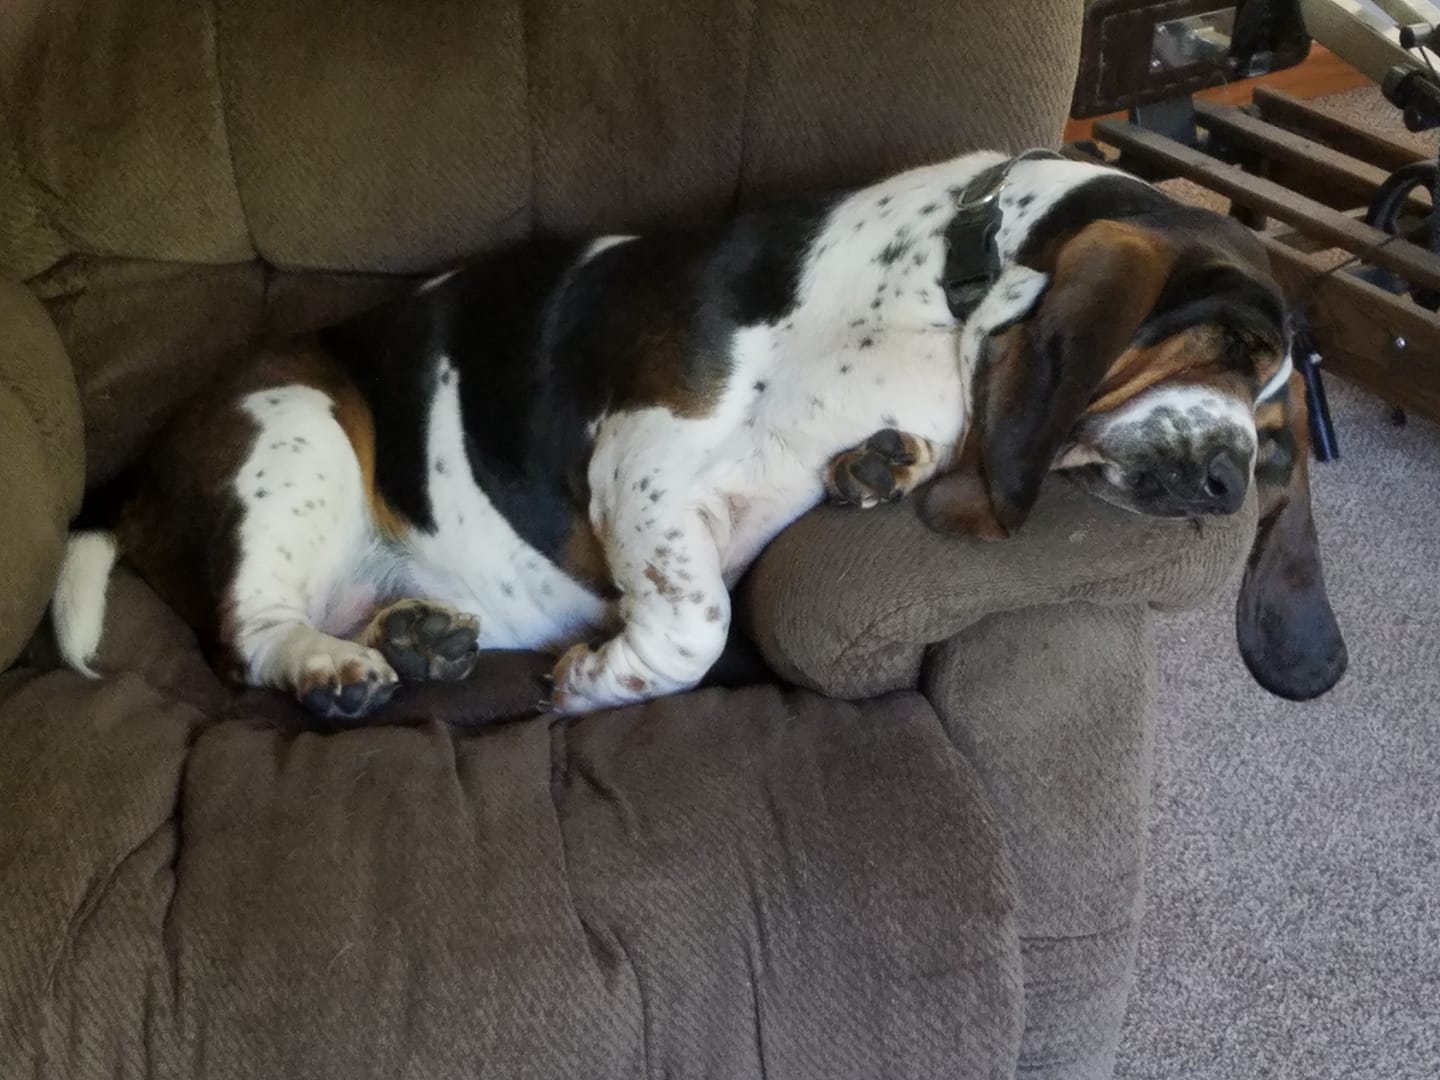 A Basset Hound sleeping on the couch